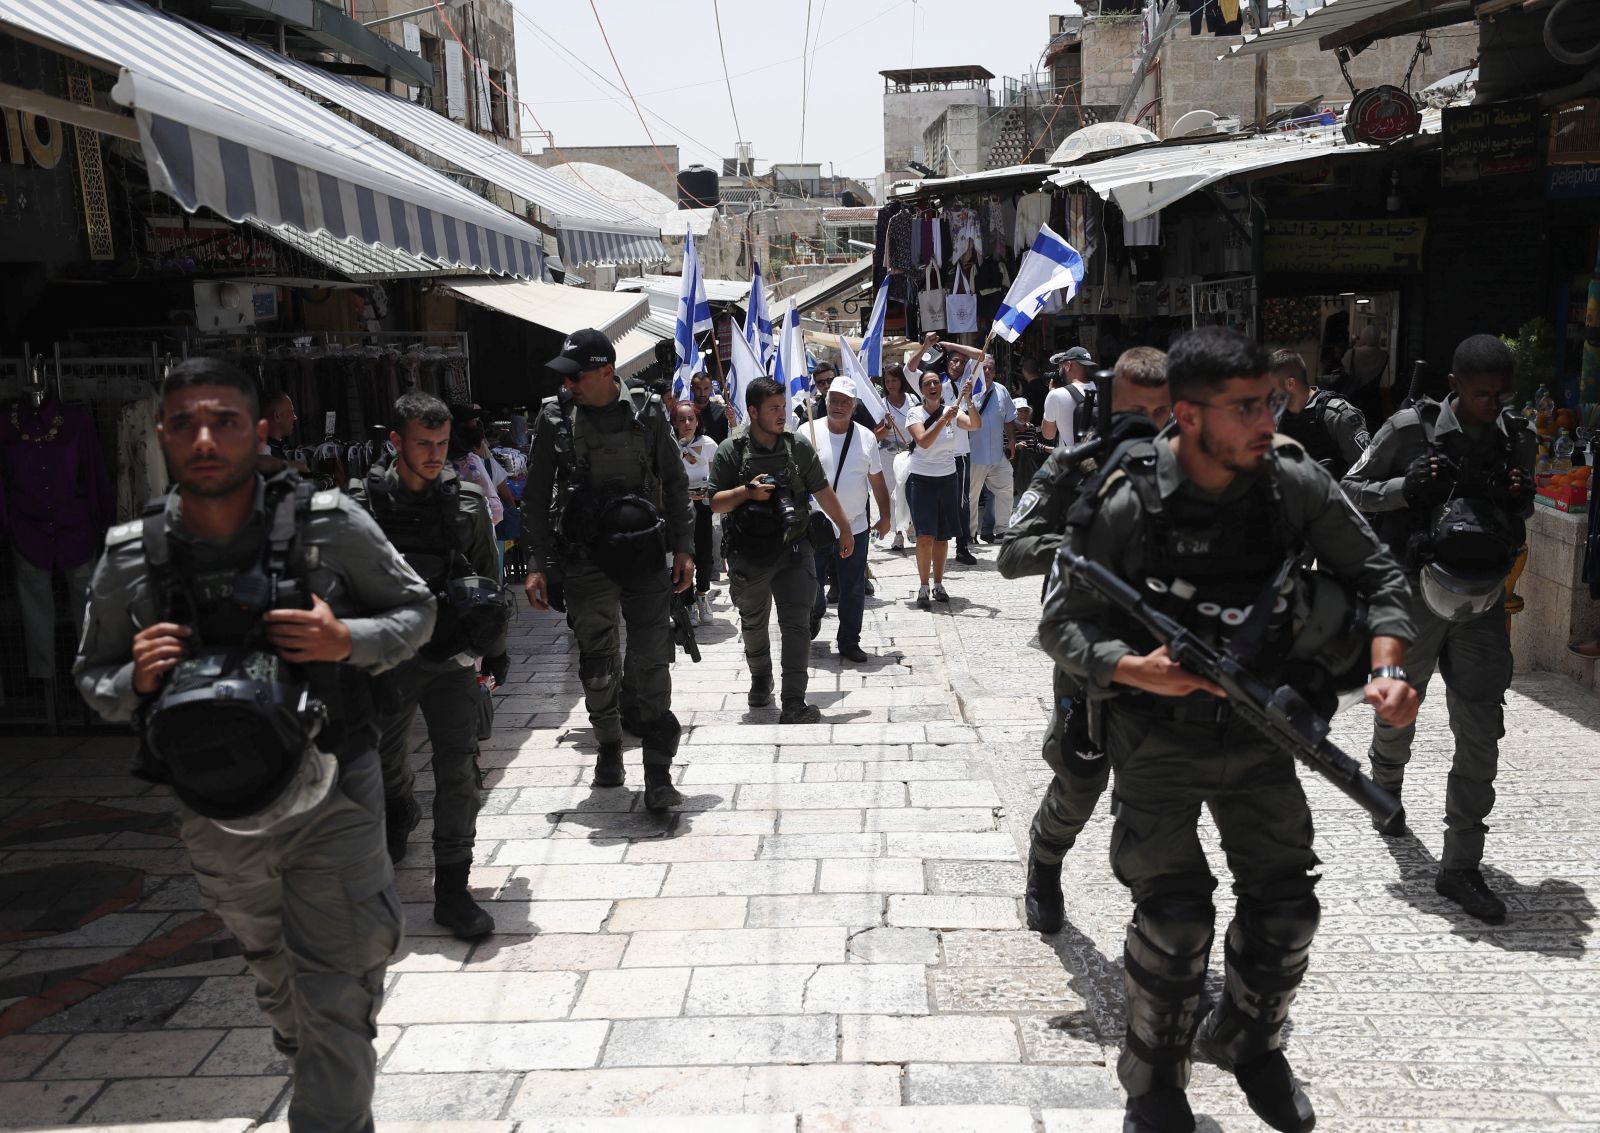 epa09983776 Israeli security forces guard participants during the Israeli right-wing 'Flag March' in the Jerusalem's Old City, Jerusalem, 29 May 2022. The annual right-wing Israeli 'Flag March' celebrating the Jerusalem Day has long been viewed by Palestinians as a provocation. Large number of Israeli police forces have been deployed in the Old city of Jerusalem and Palestinian counter protests are expected to take place in the Gaza City and West Bank.  EPA/ATEF SAFADI